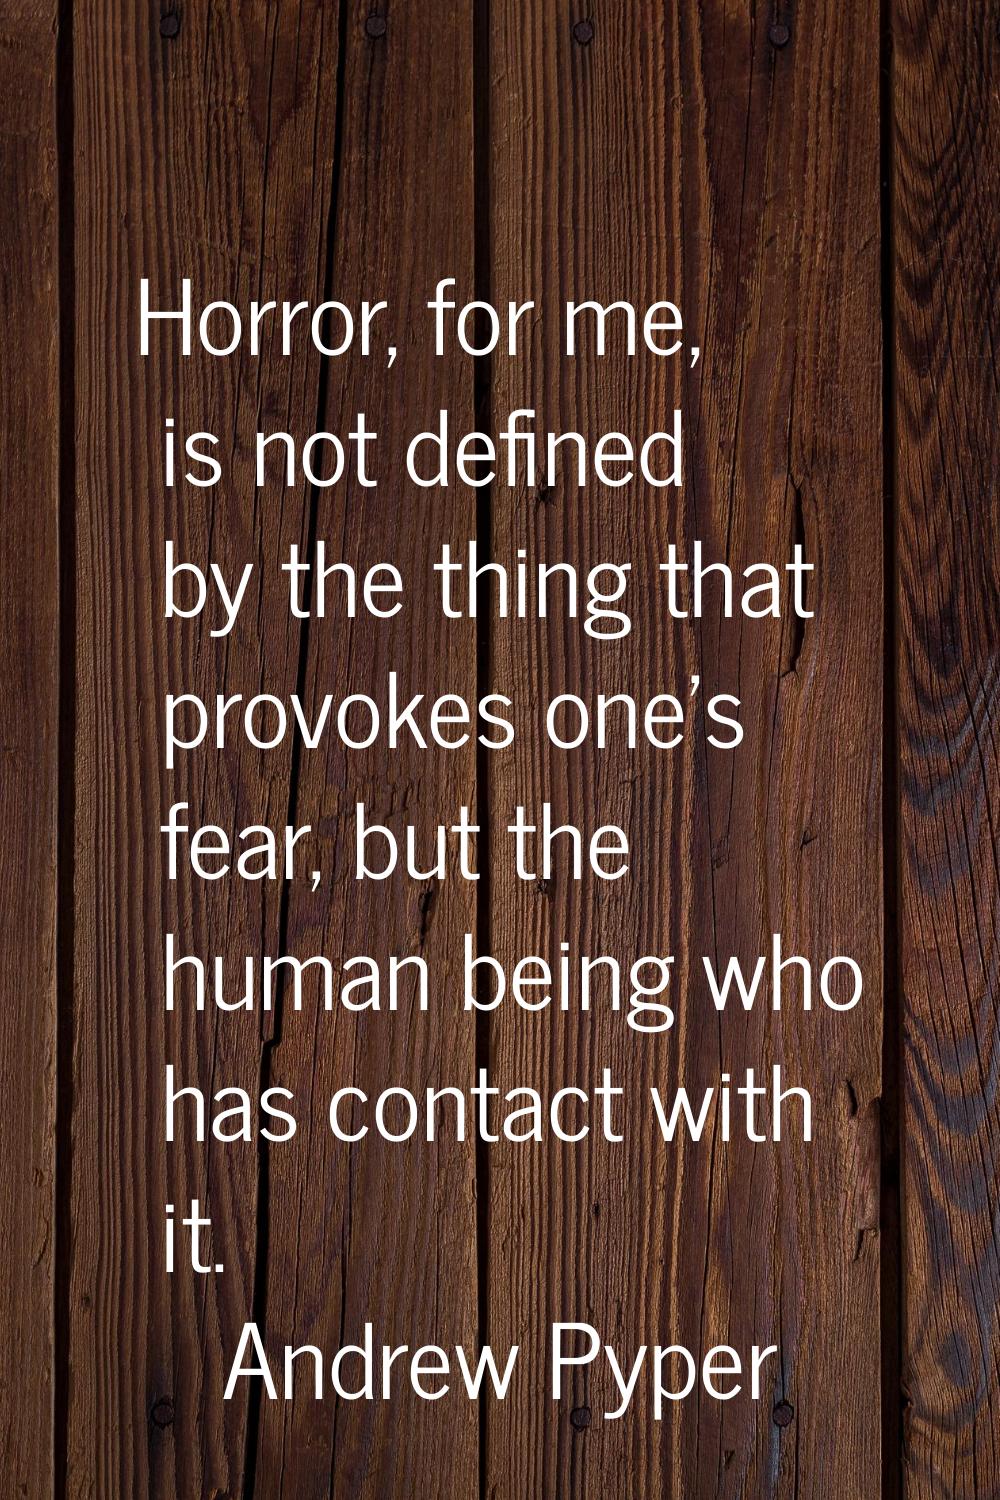 Horror, for me, is not defined by the thing that provokes one's fear, but the human being who has c